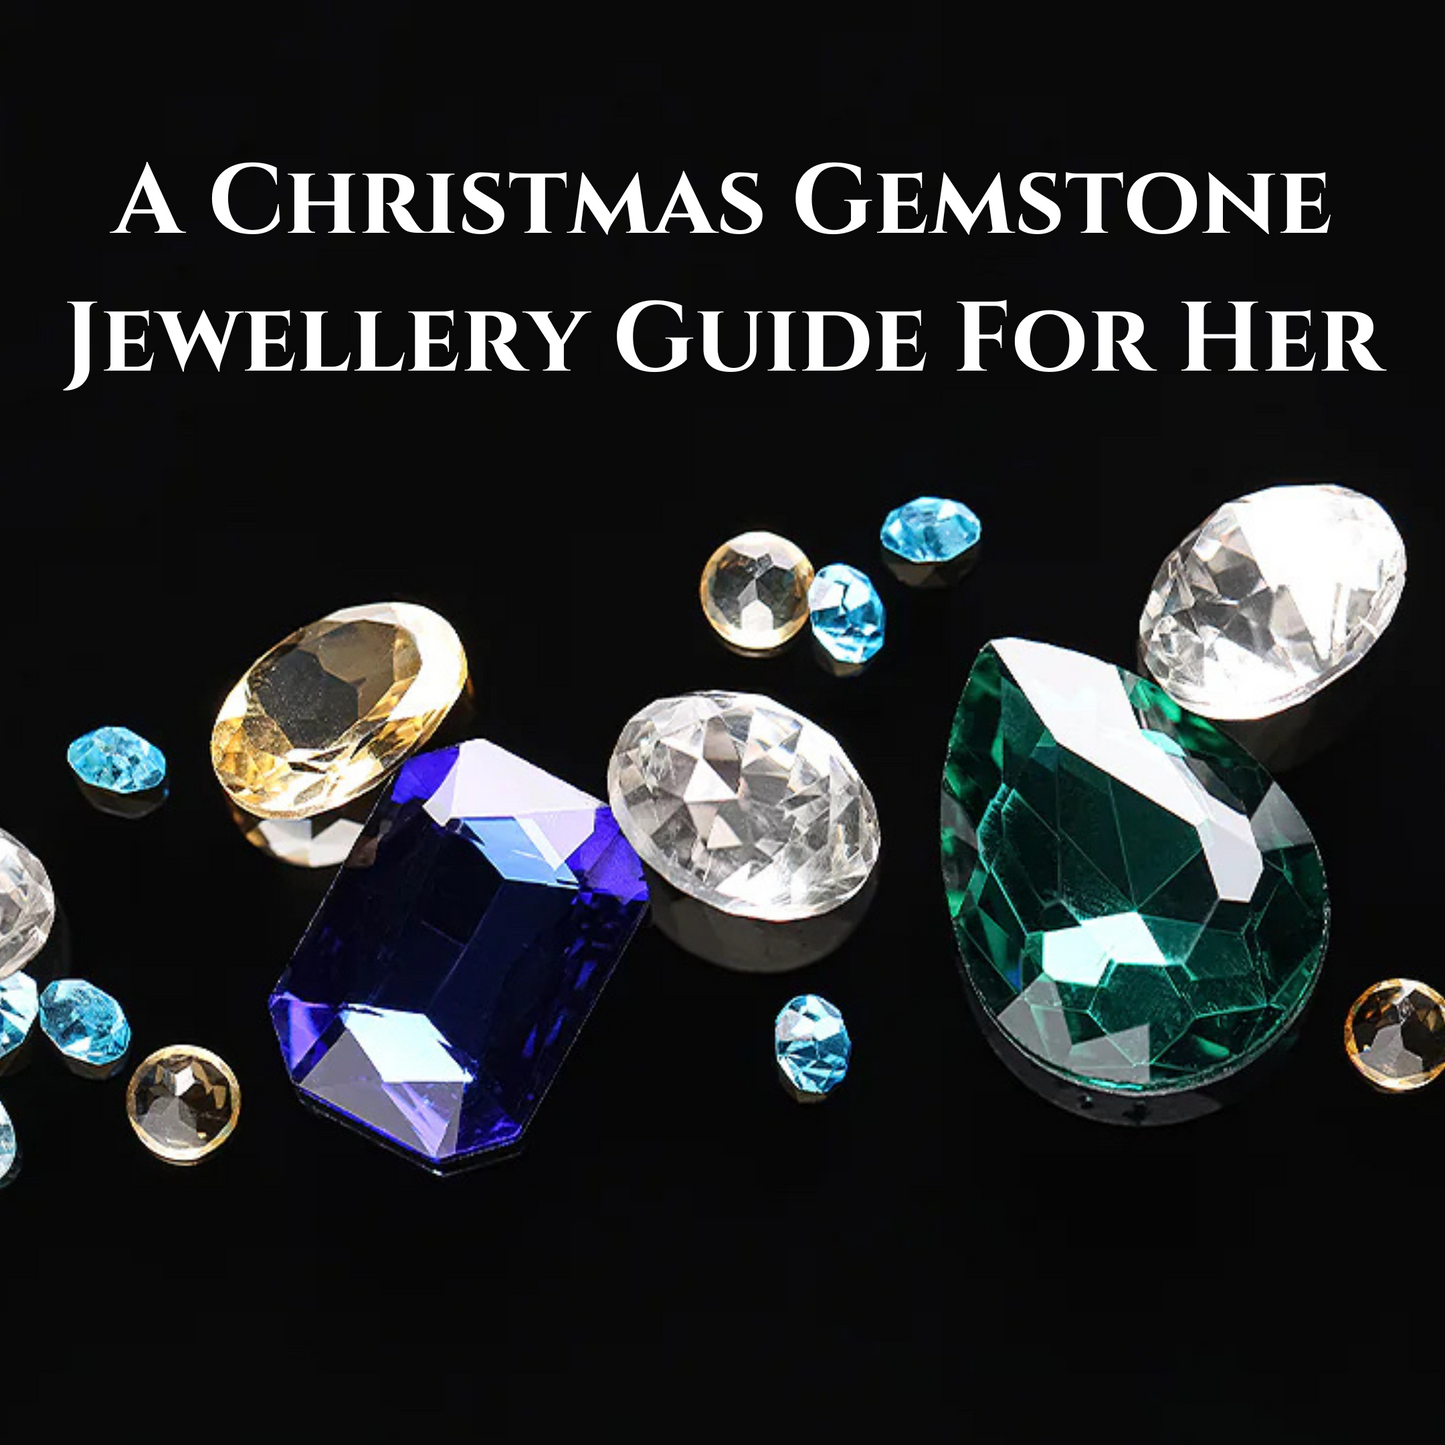 A Christmas Gemstone Jewellery Guide For Her